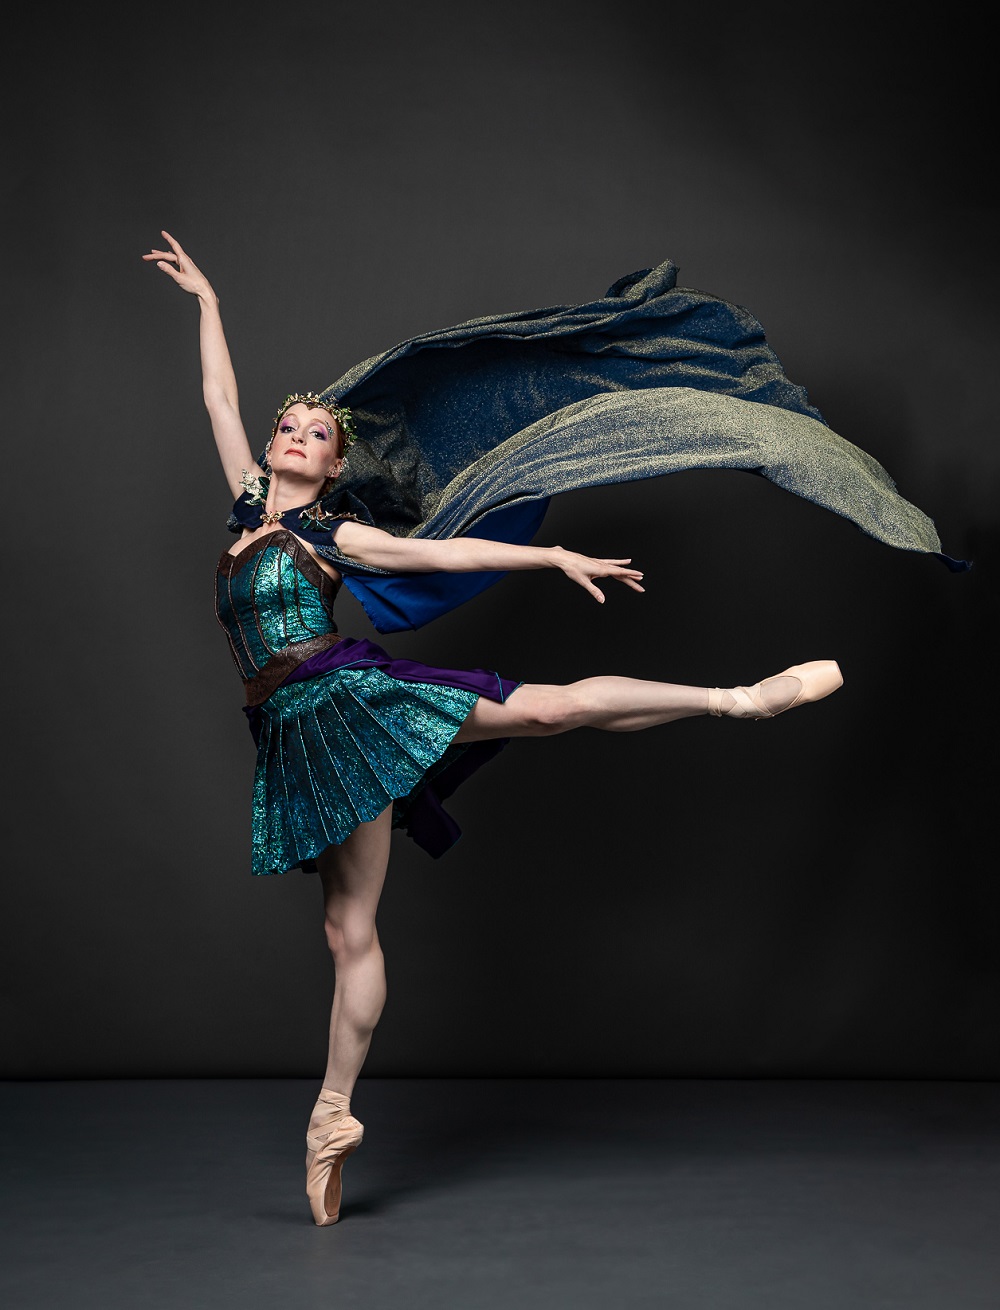 American Repertory Ballet Presents the World Premiere of Ethan Stiefel's A Midsummer Night's Dream